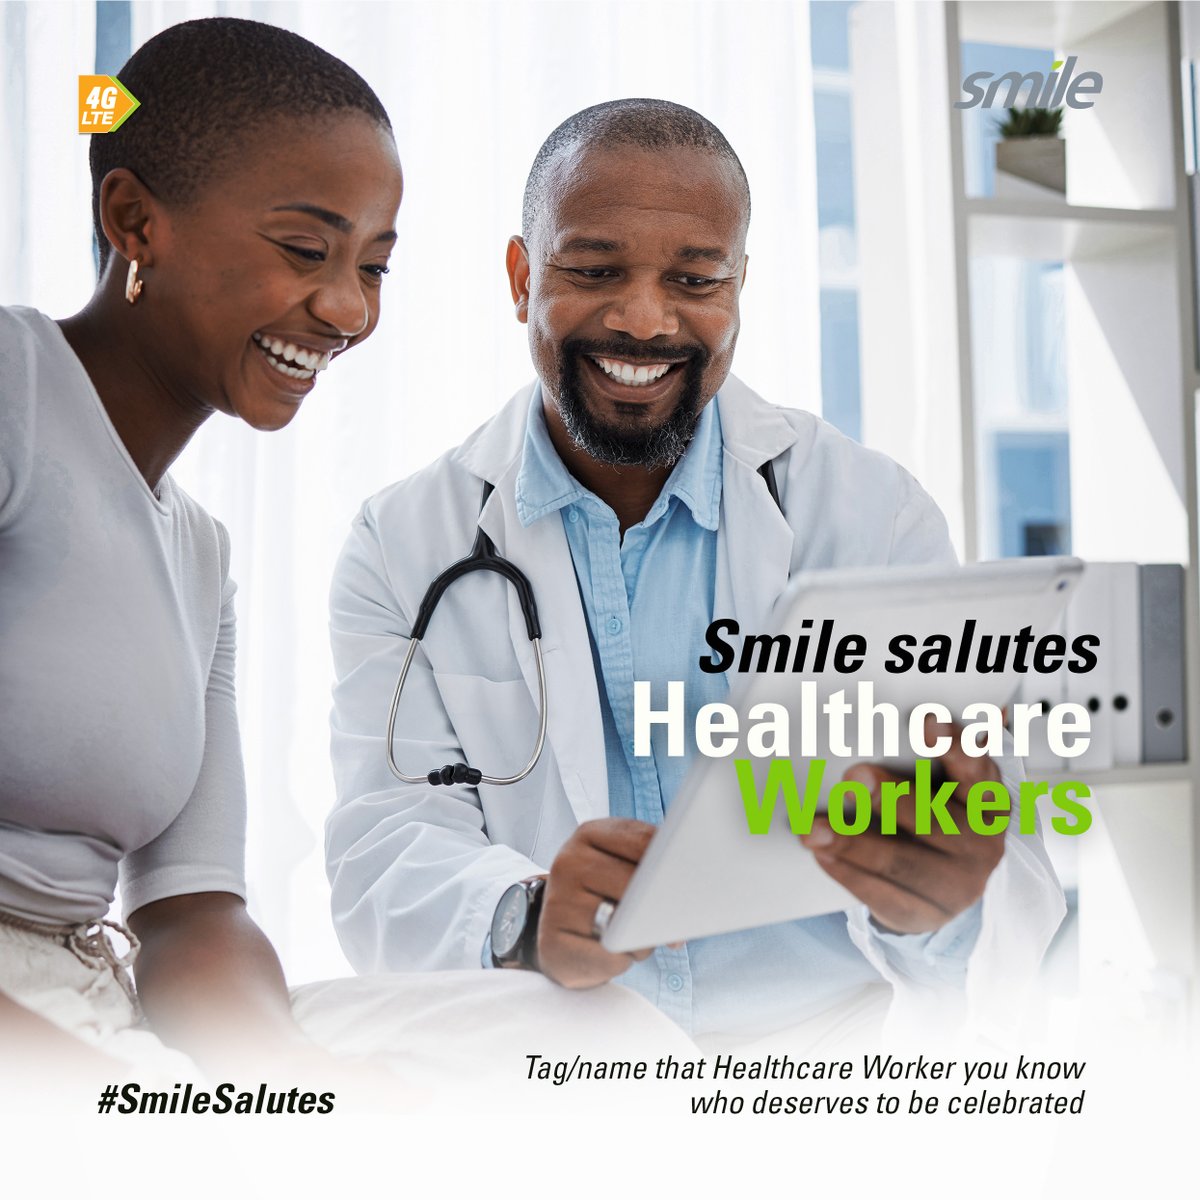 Smile   Salutes the tenacity of the Health Care workers today
 
Tag any hard working healthcare worker that you know who deserves to be   celebrated. 
 
Highest nominations by reactions wins a special gift. Smile
 
#Smile #SmileSalutes #workersday #celebrate